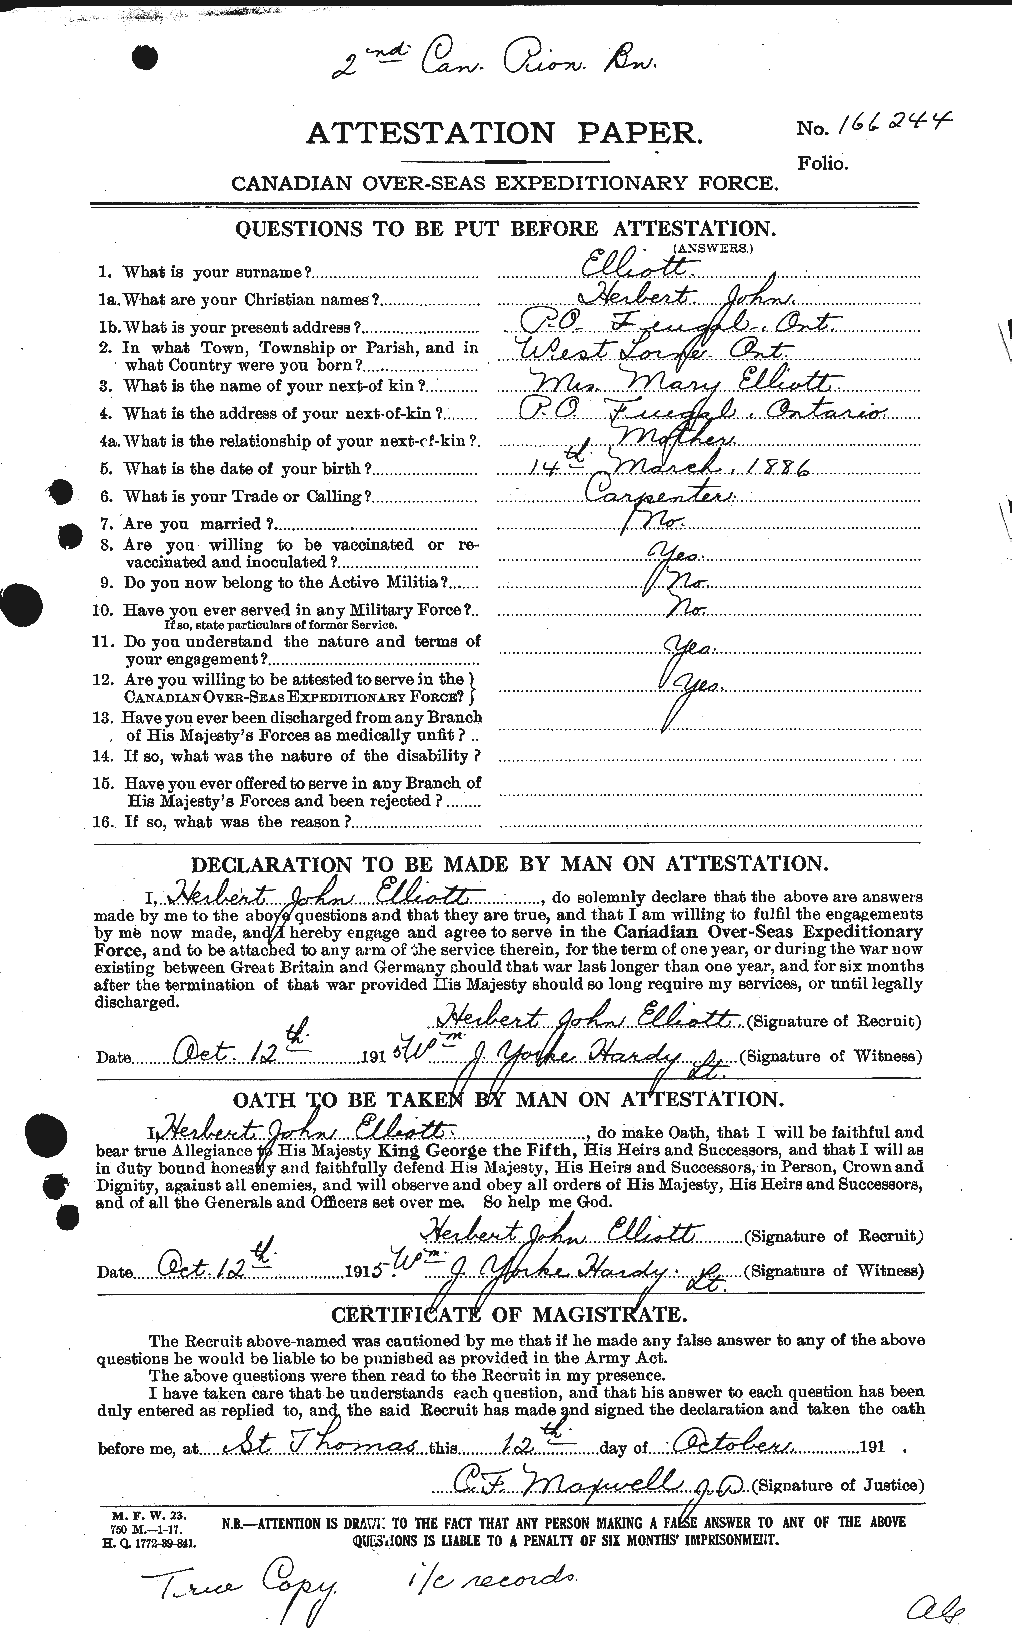 Personnel Records of the First World War - CEF 314349a